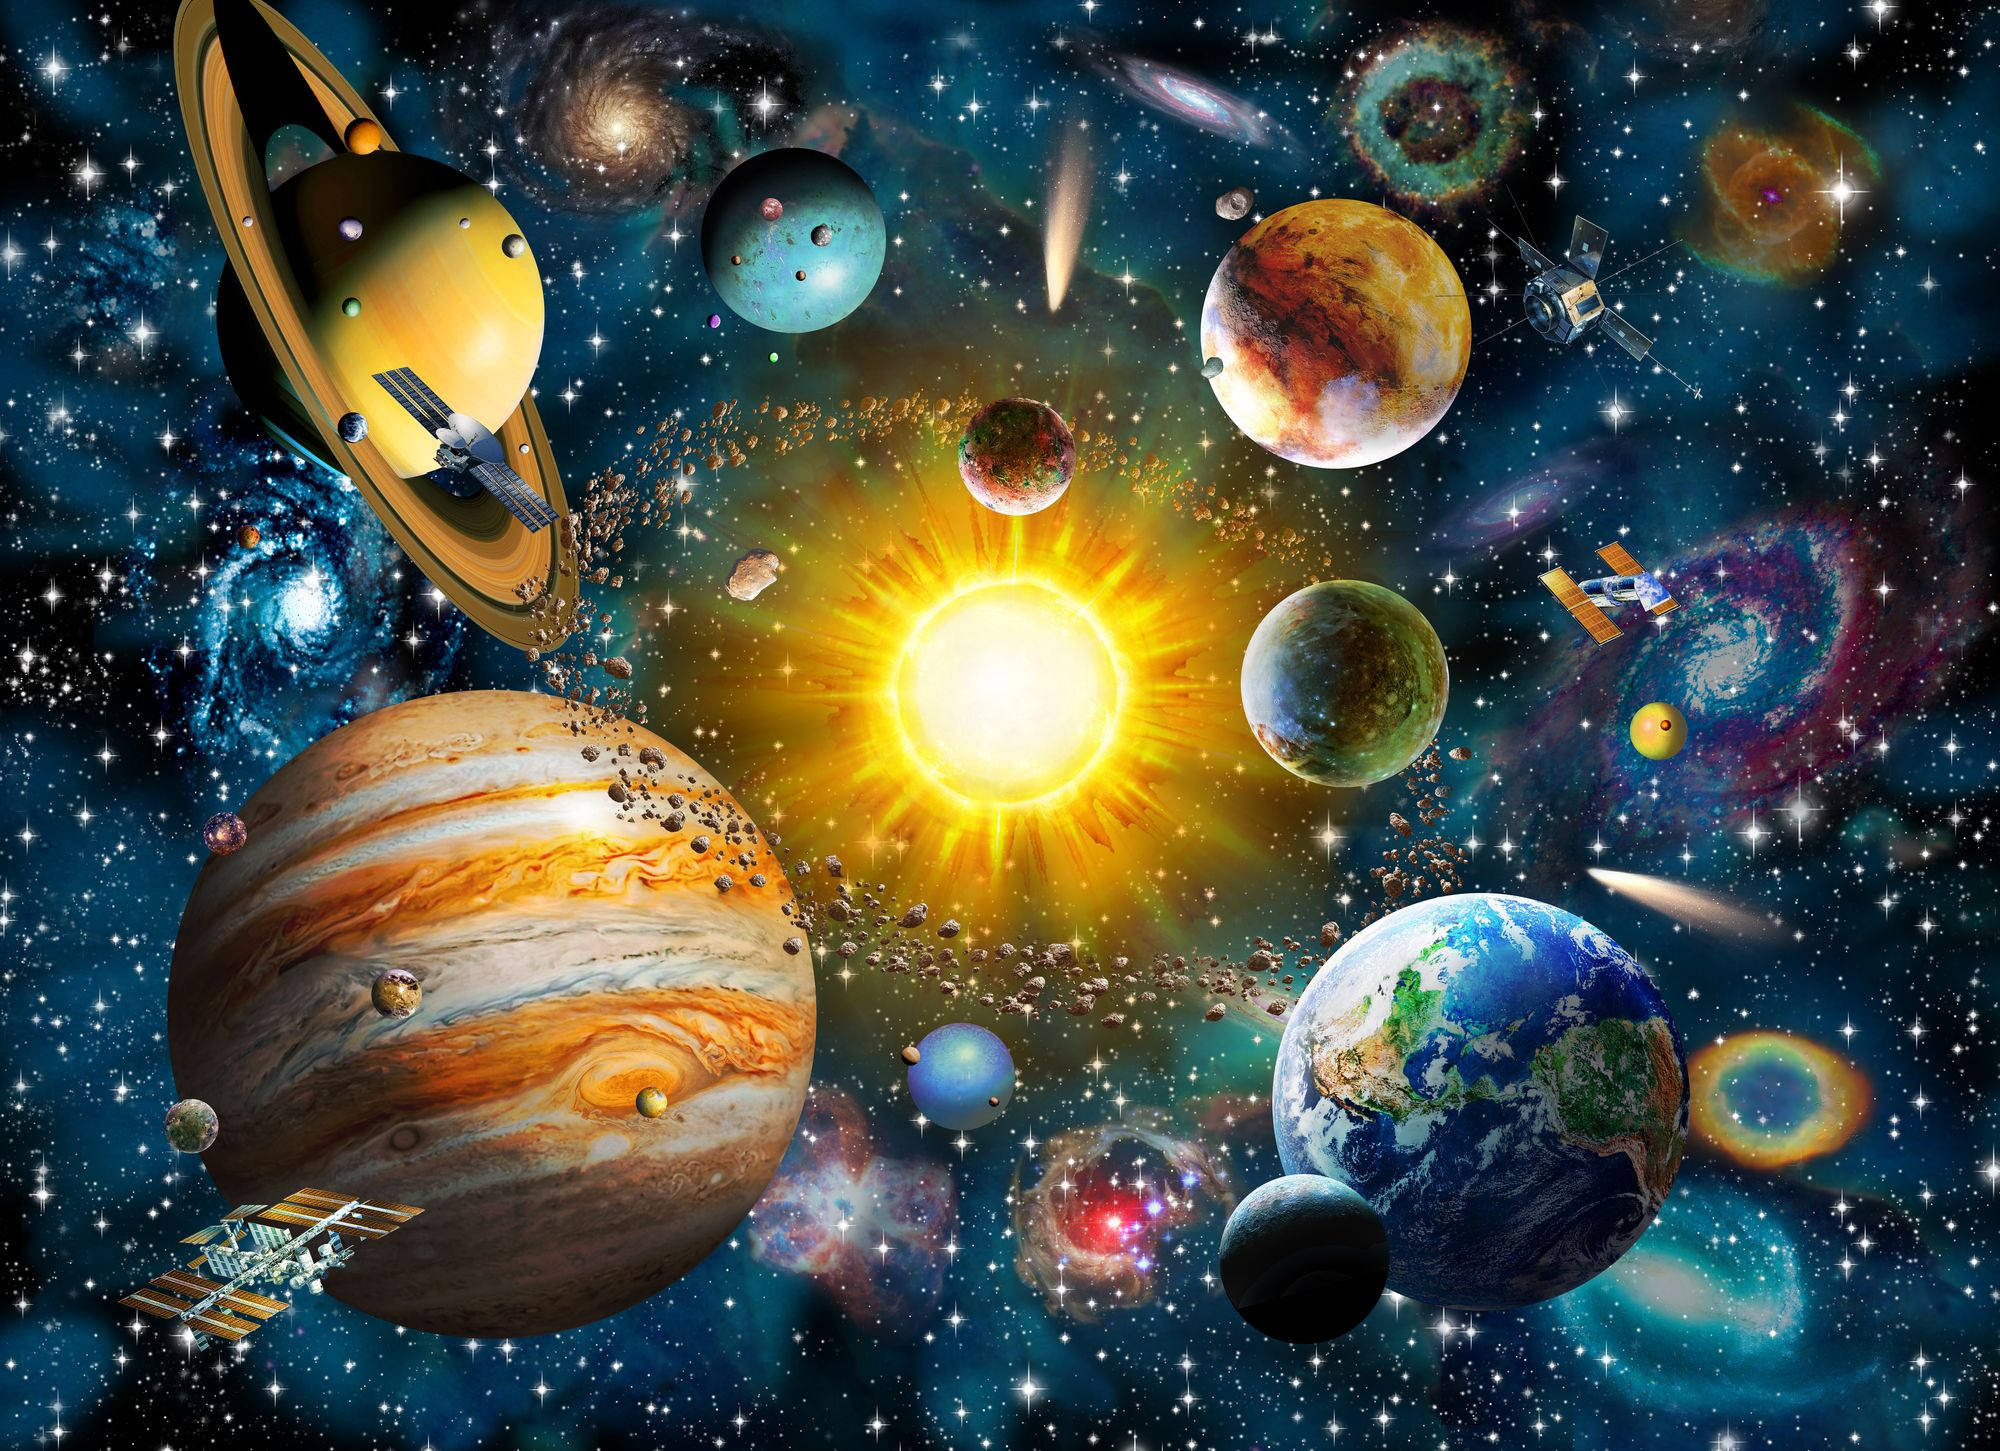 Download Our Solar System Mural Aesthetic Wallpaper | Wallpapers.com